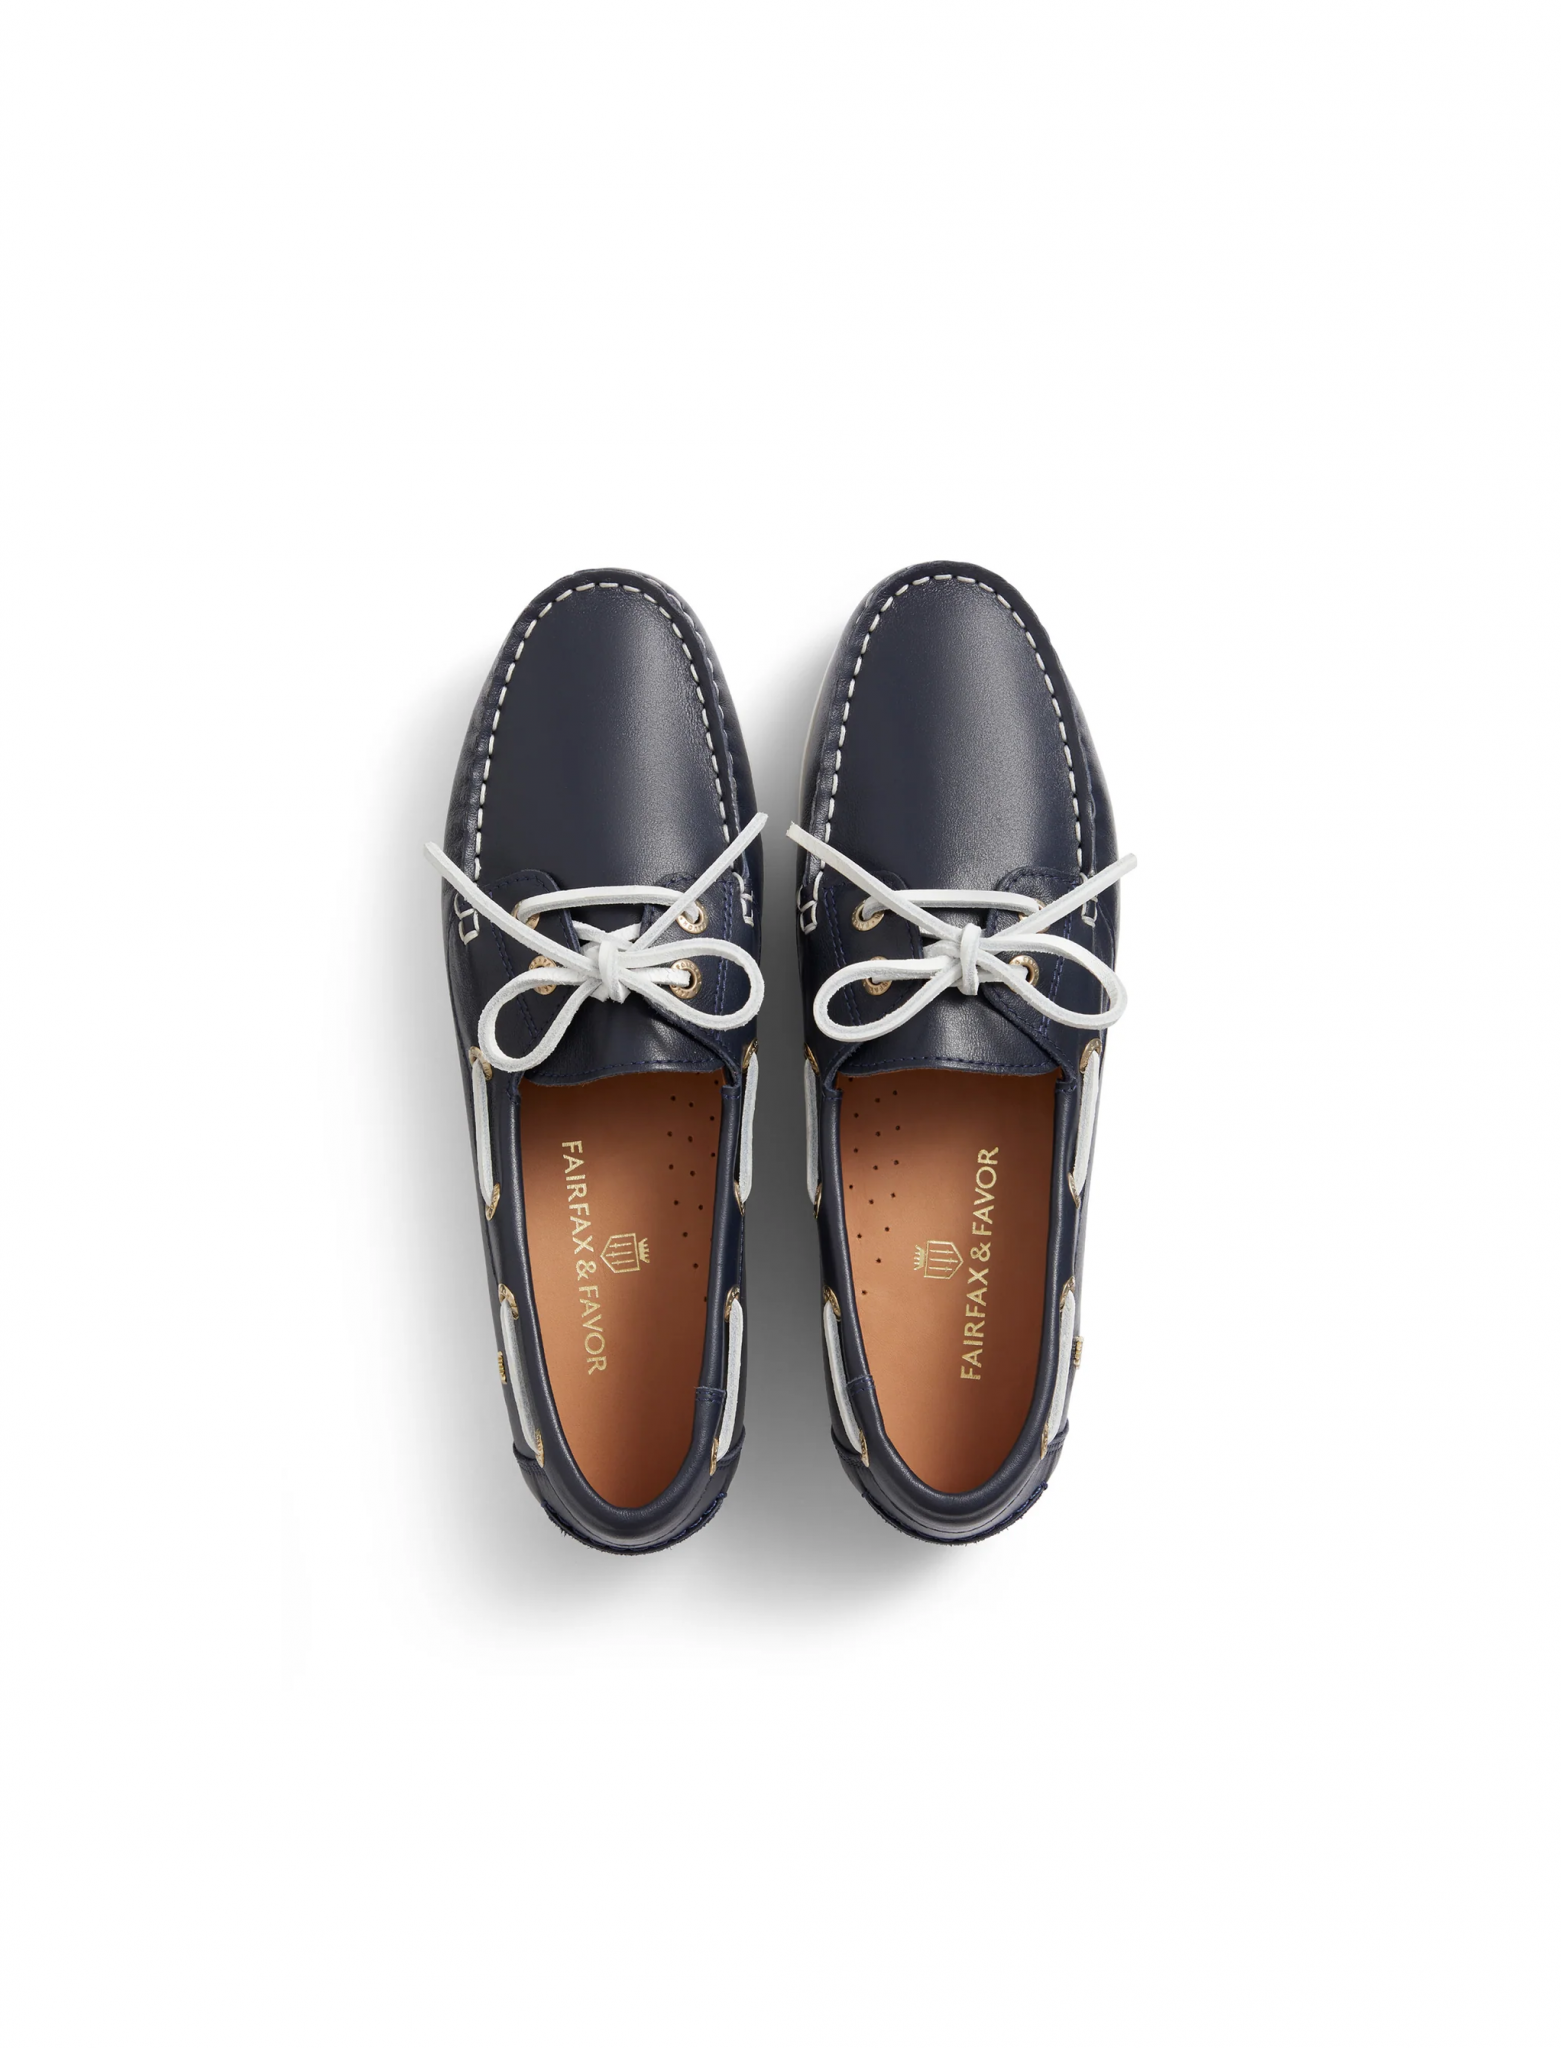 Fairfax & Favor Salcombe Leather Deck Shoe - Navy - Ruffords Country Store